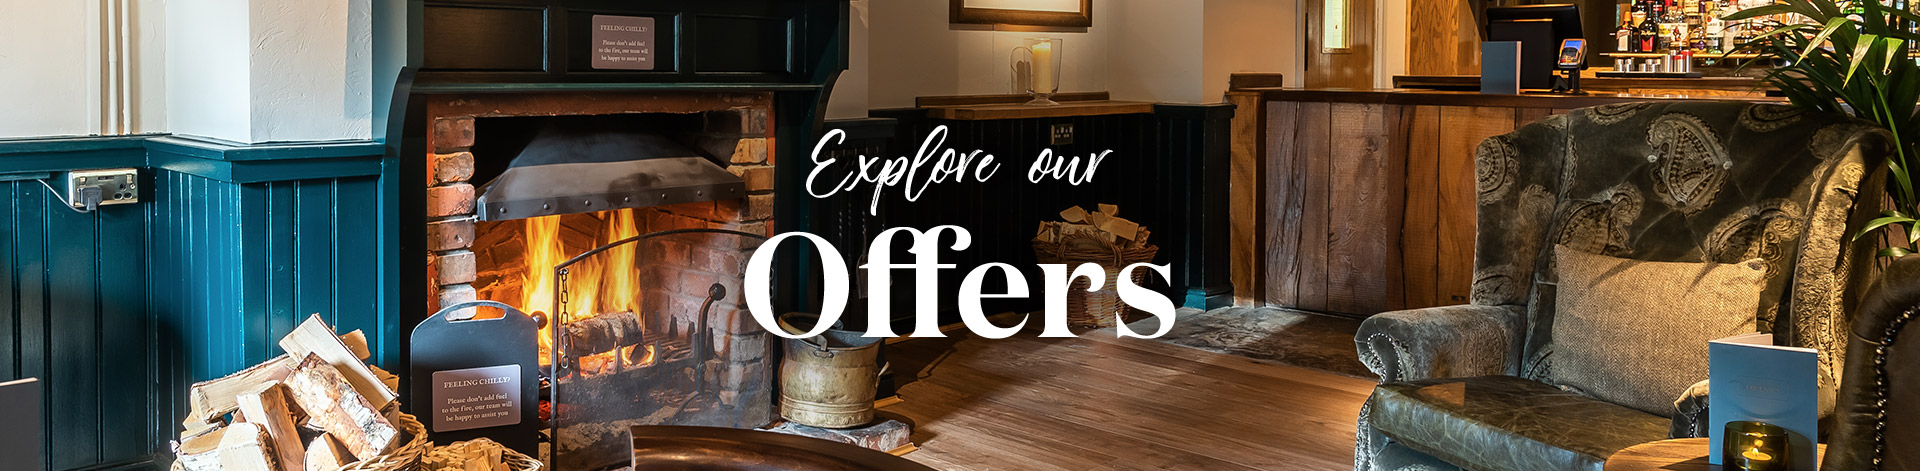 Our latest offers at The Tame Otter